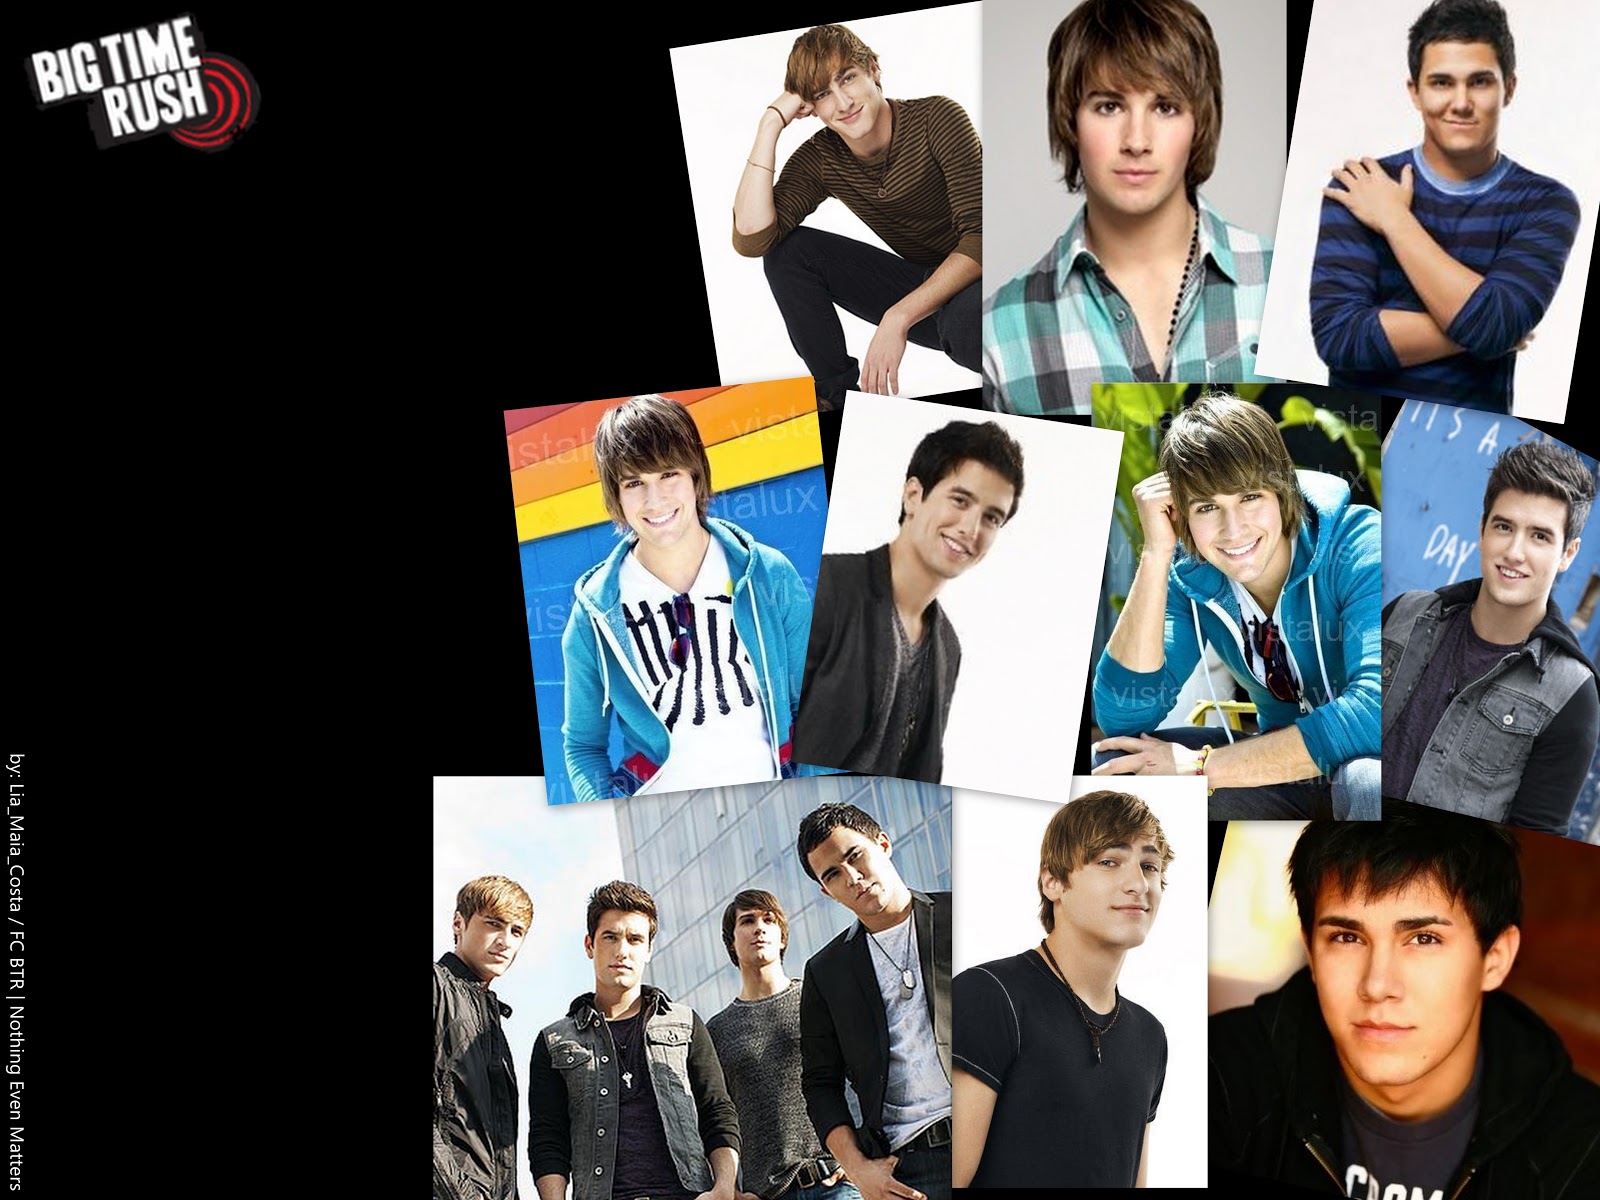 big time rush wallpaper,facial expression,social group,collage,youth,team